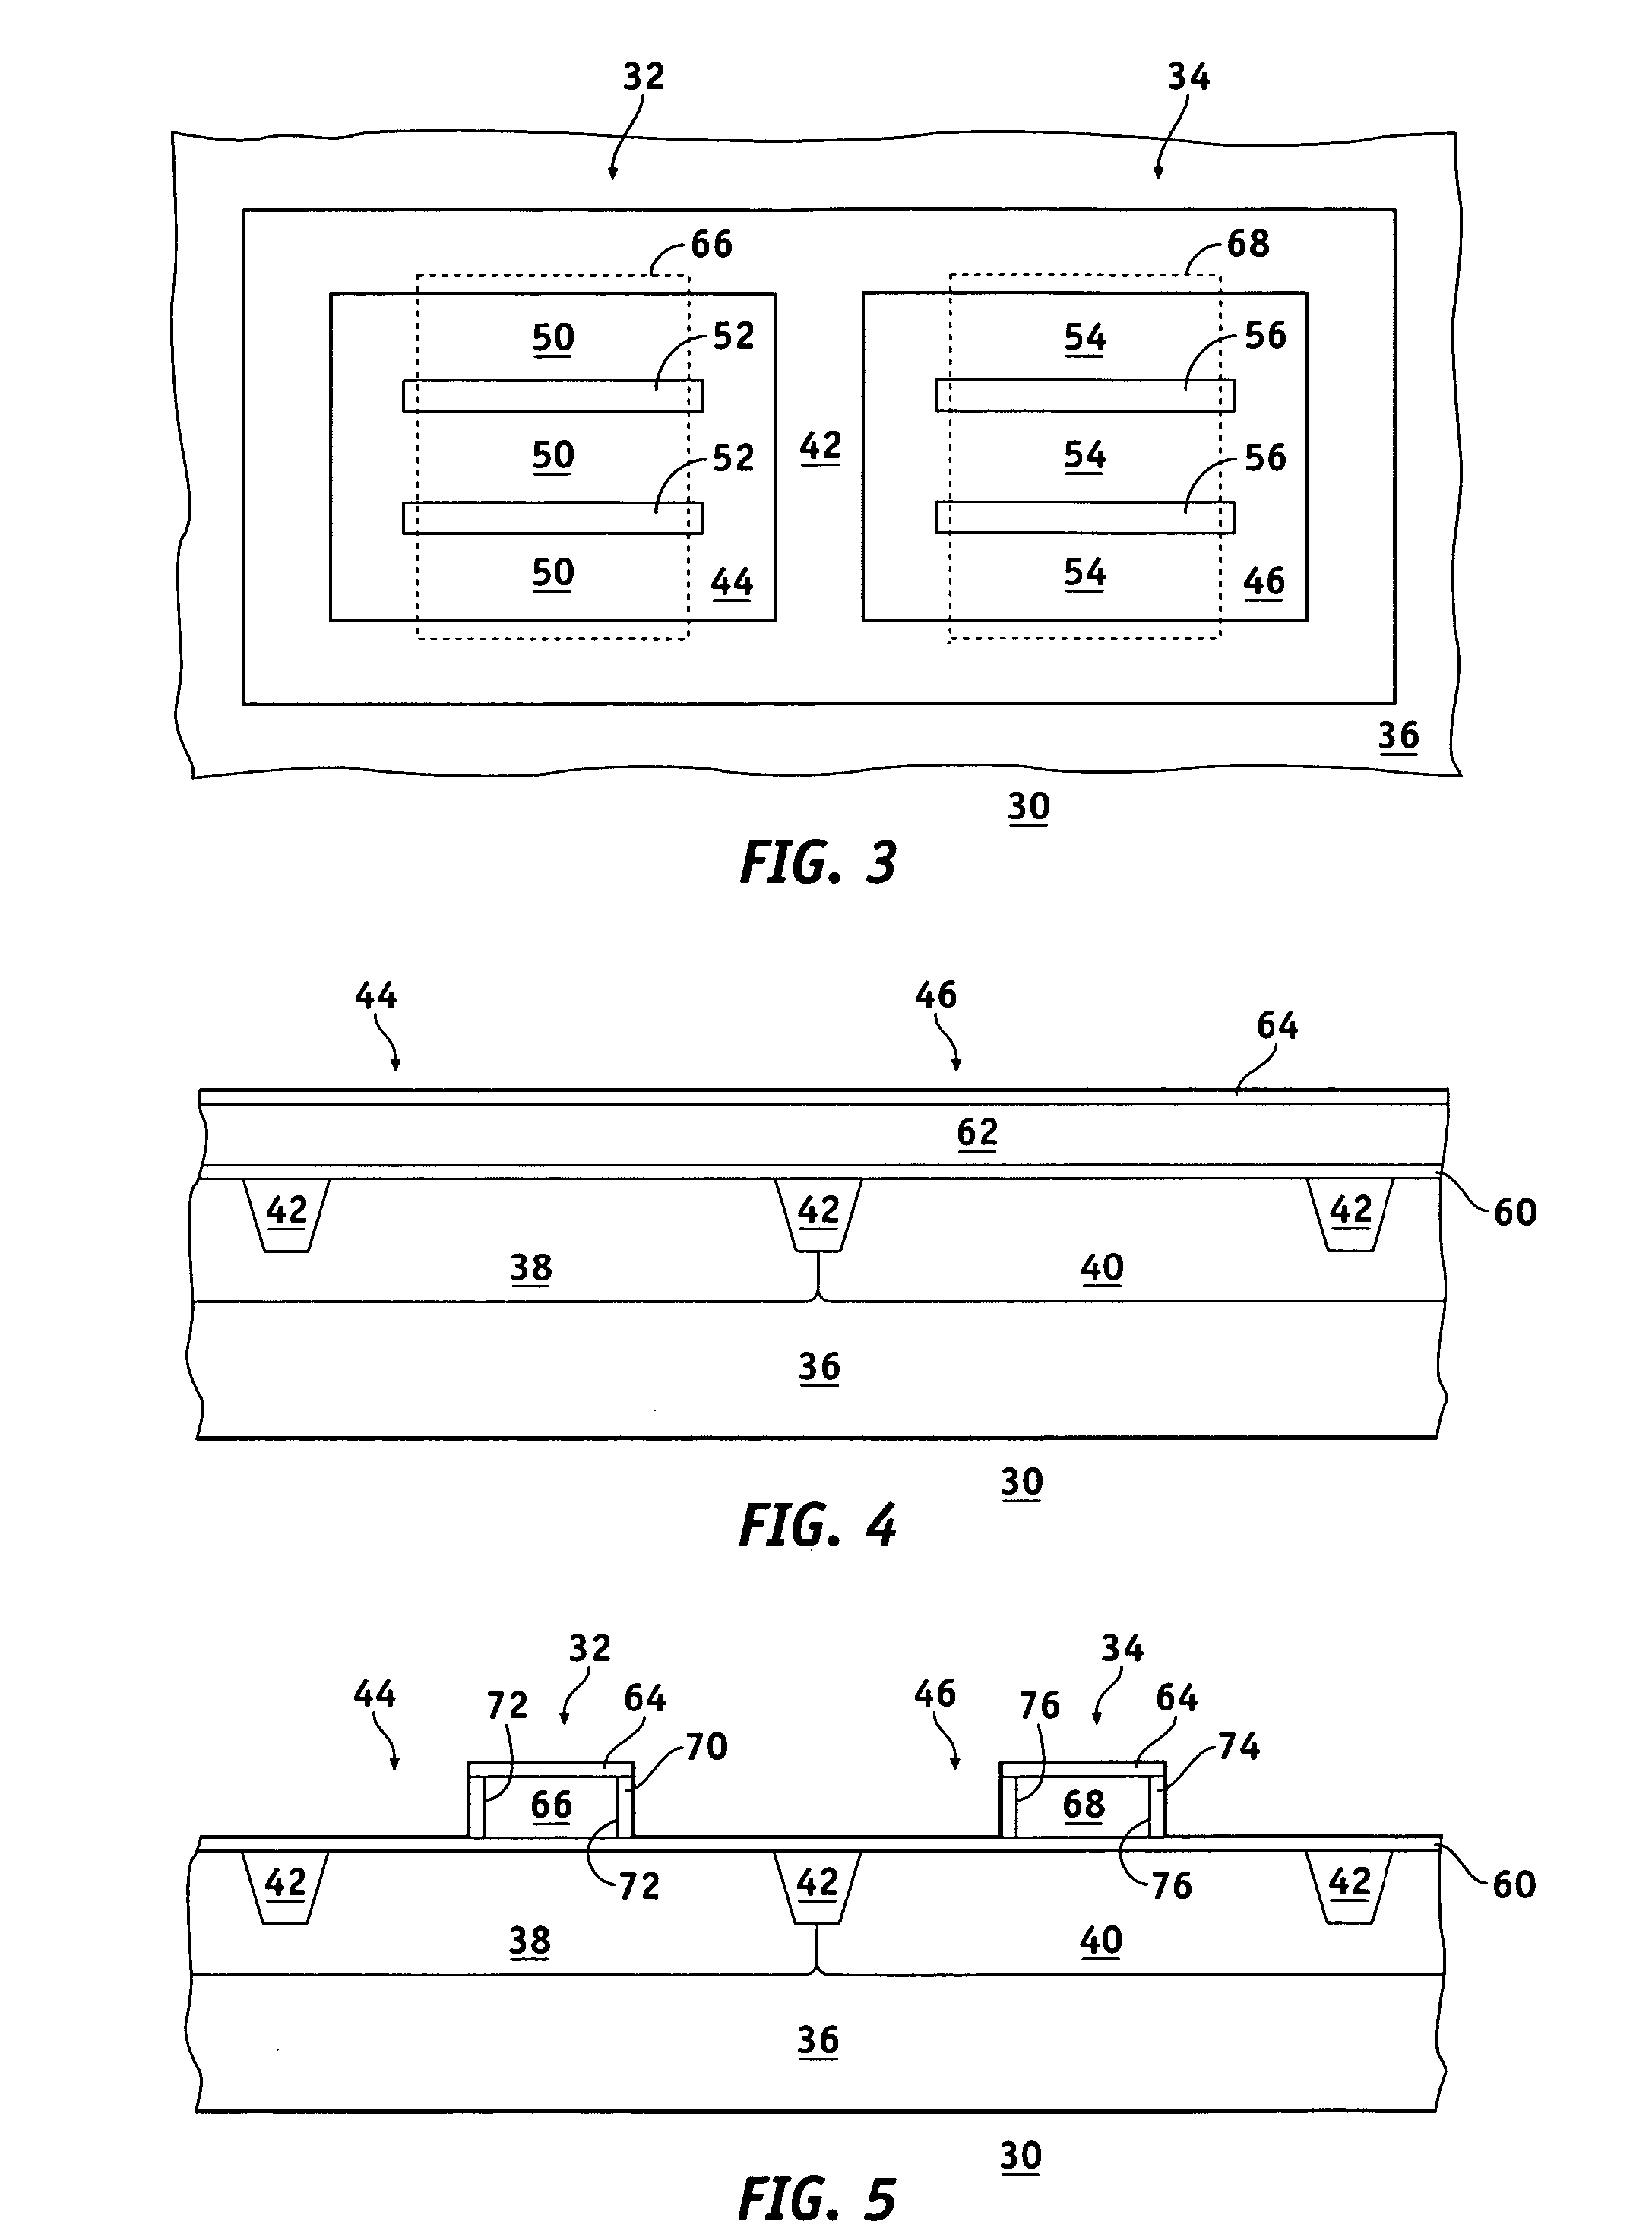 Methods for fabricating a stressed MOS device